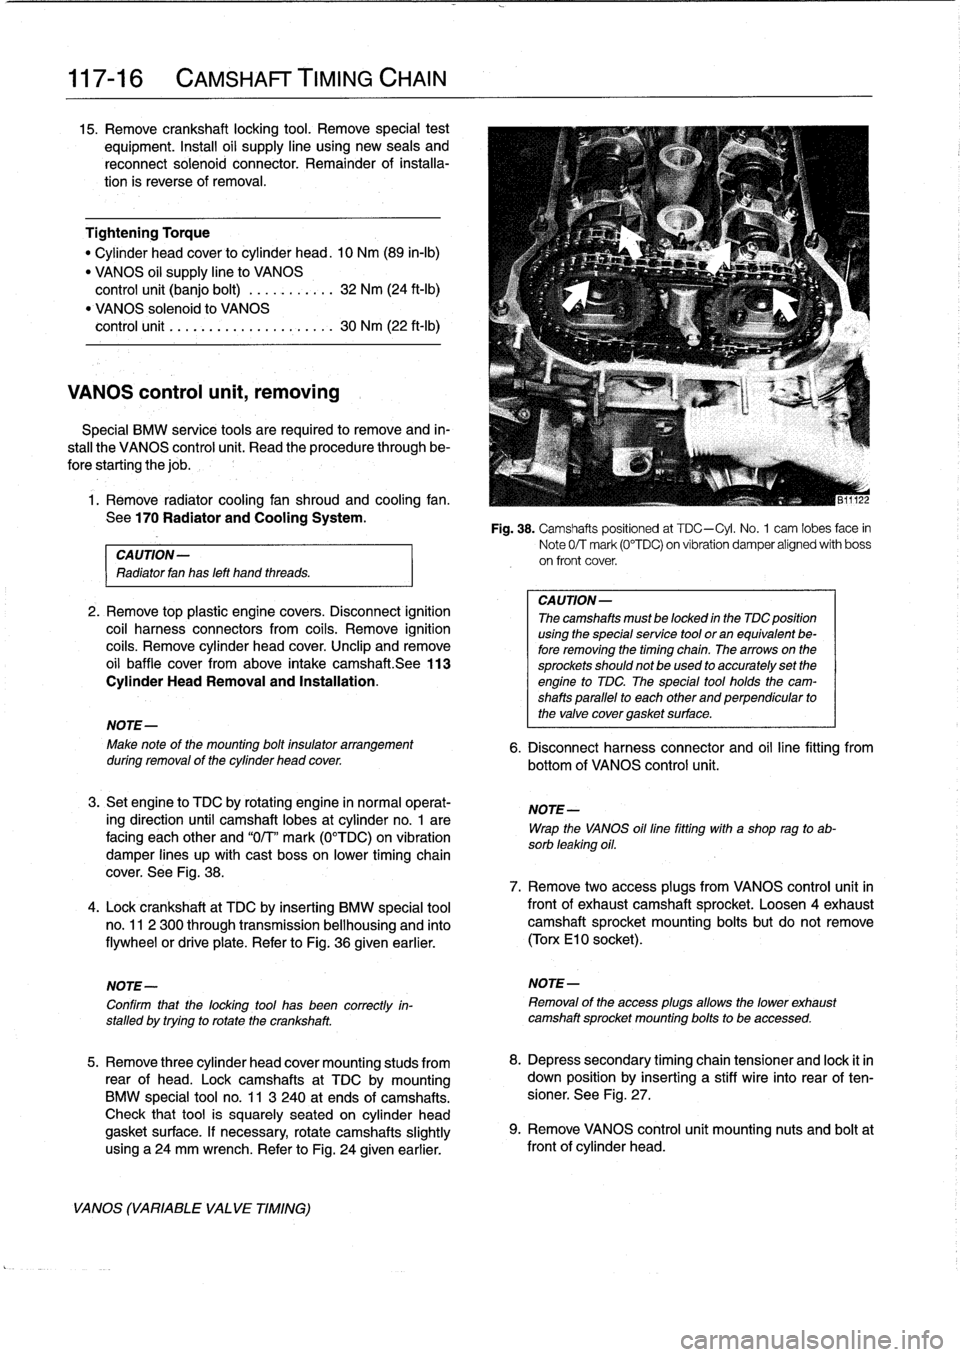 BMW 318i 1997 E36 Service Manual 
117-
1
6

	

CAMSHAFT
TIMING
CHAIN

15
.
Remove
crankshaft
locking
tool
.
Remove
special
test

equipment
.
Insta¡¡
oil
supply
line
using
new
seals
and

reconnect
solenoid
connector
.
Remainder
of
i